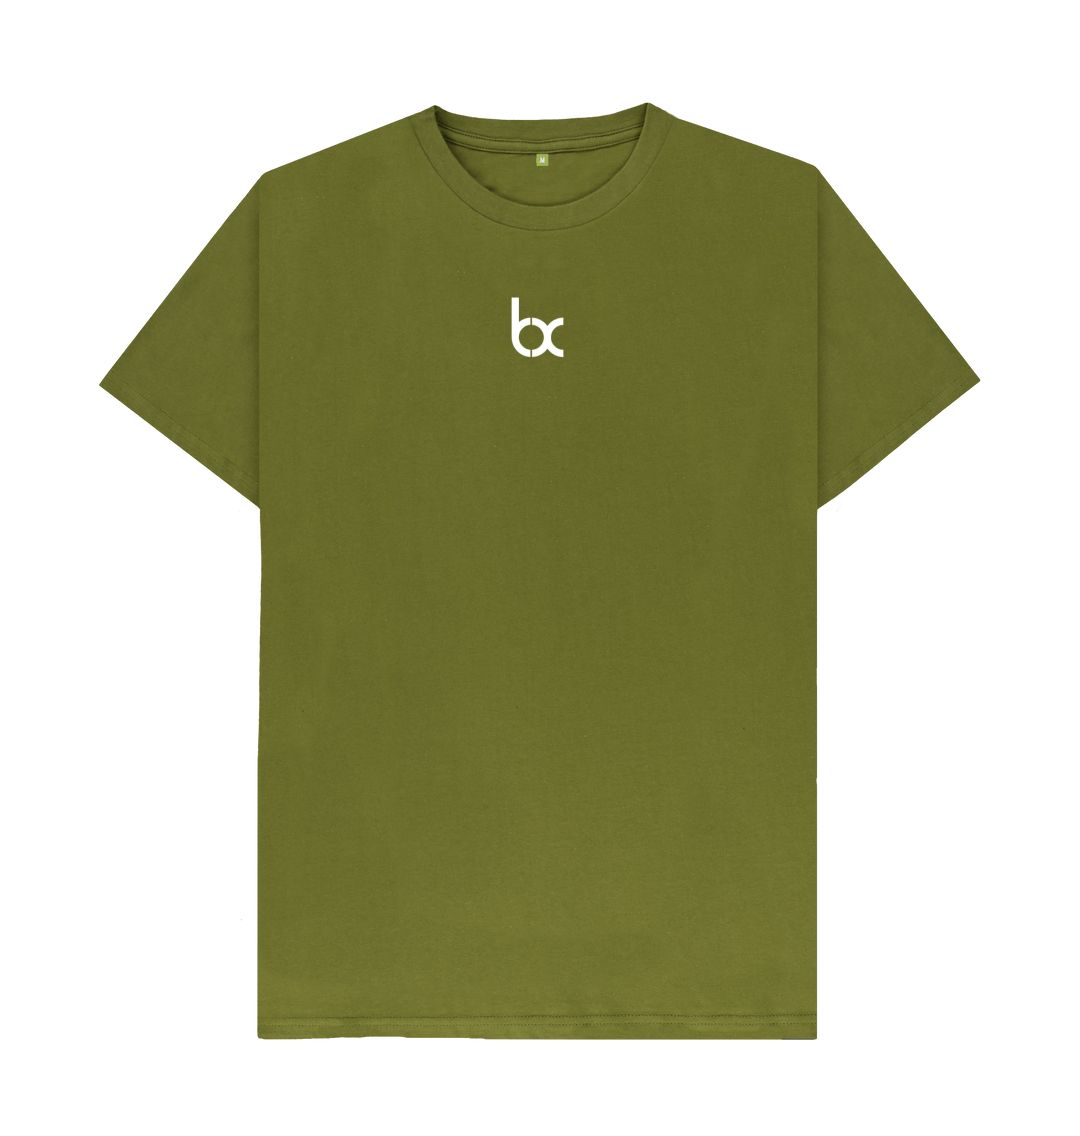 Moss Green BX Standard Tee with white logo